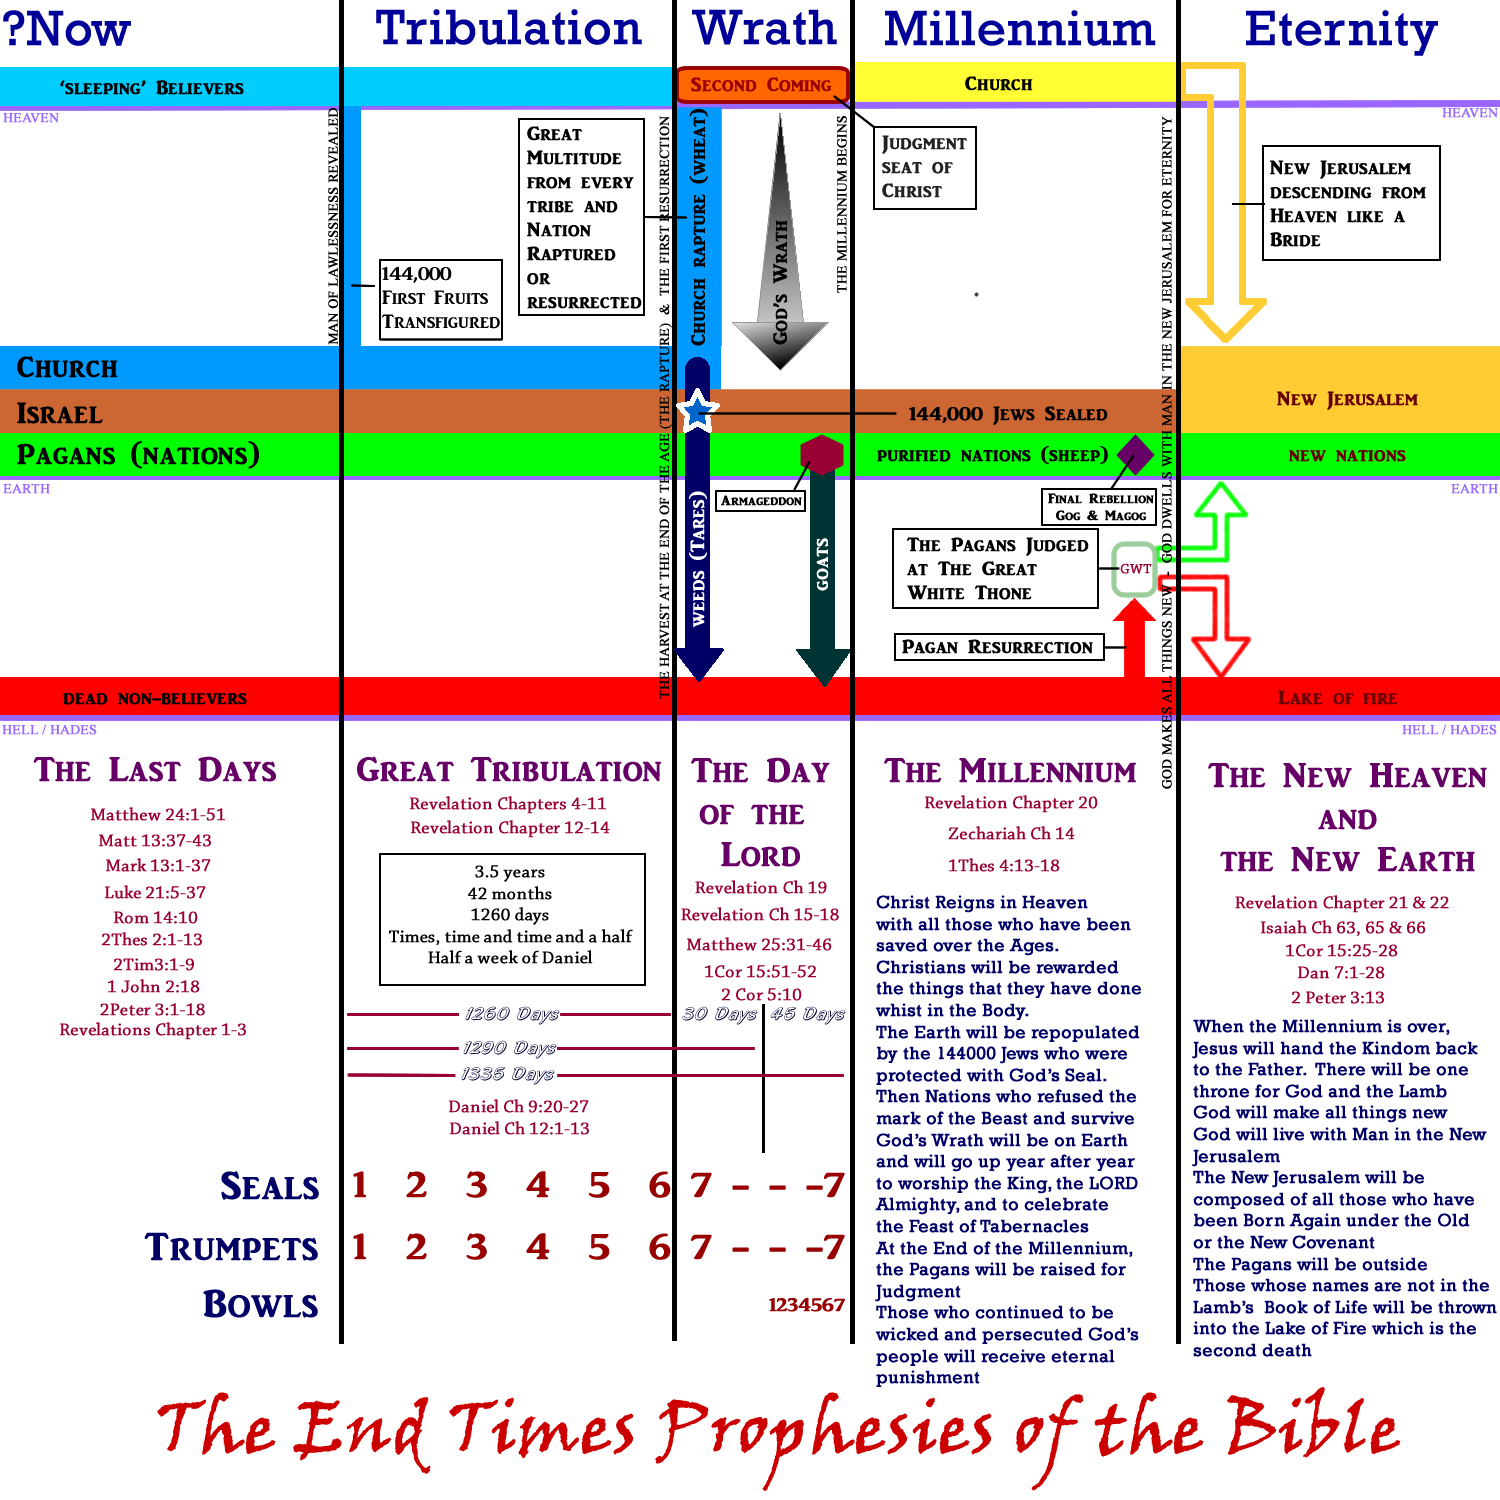 Timeline, diagram, chart of the End Times including the Millennium, The Great Tribulation, Eternity, The New Heaven and Earth, The New Jerusalem, The Nations, Eternity, Lake of Fire, Great White Throne, Seven, seals, trumpets, bowls, revelation, Bible, second coming of Christ, day of the Lord, Armageddon